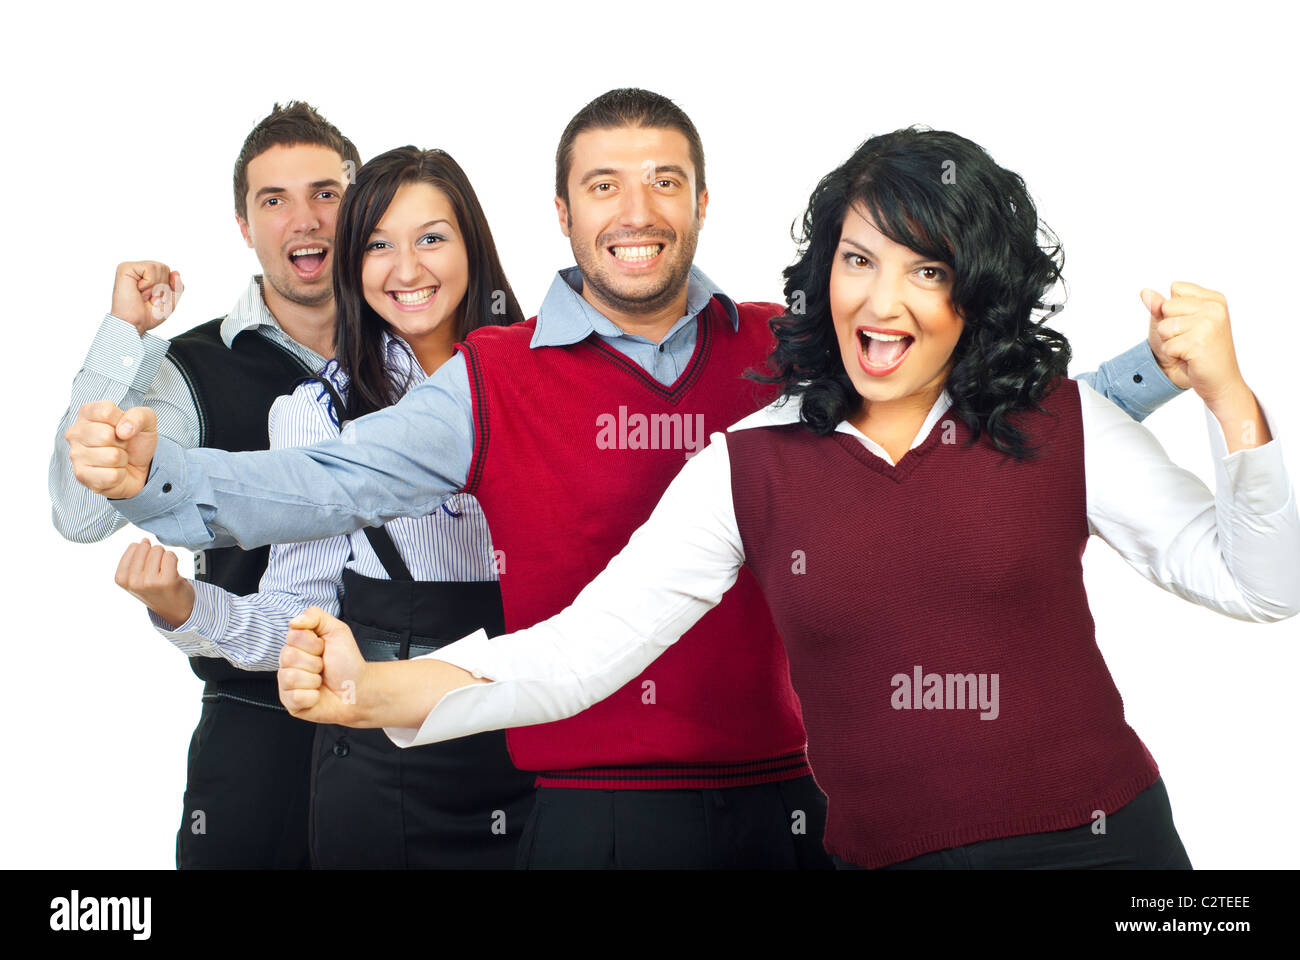 Excited business people group won something and standing with arms up and shouting their happiness isolated on white background Stock Photo